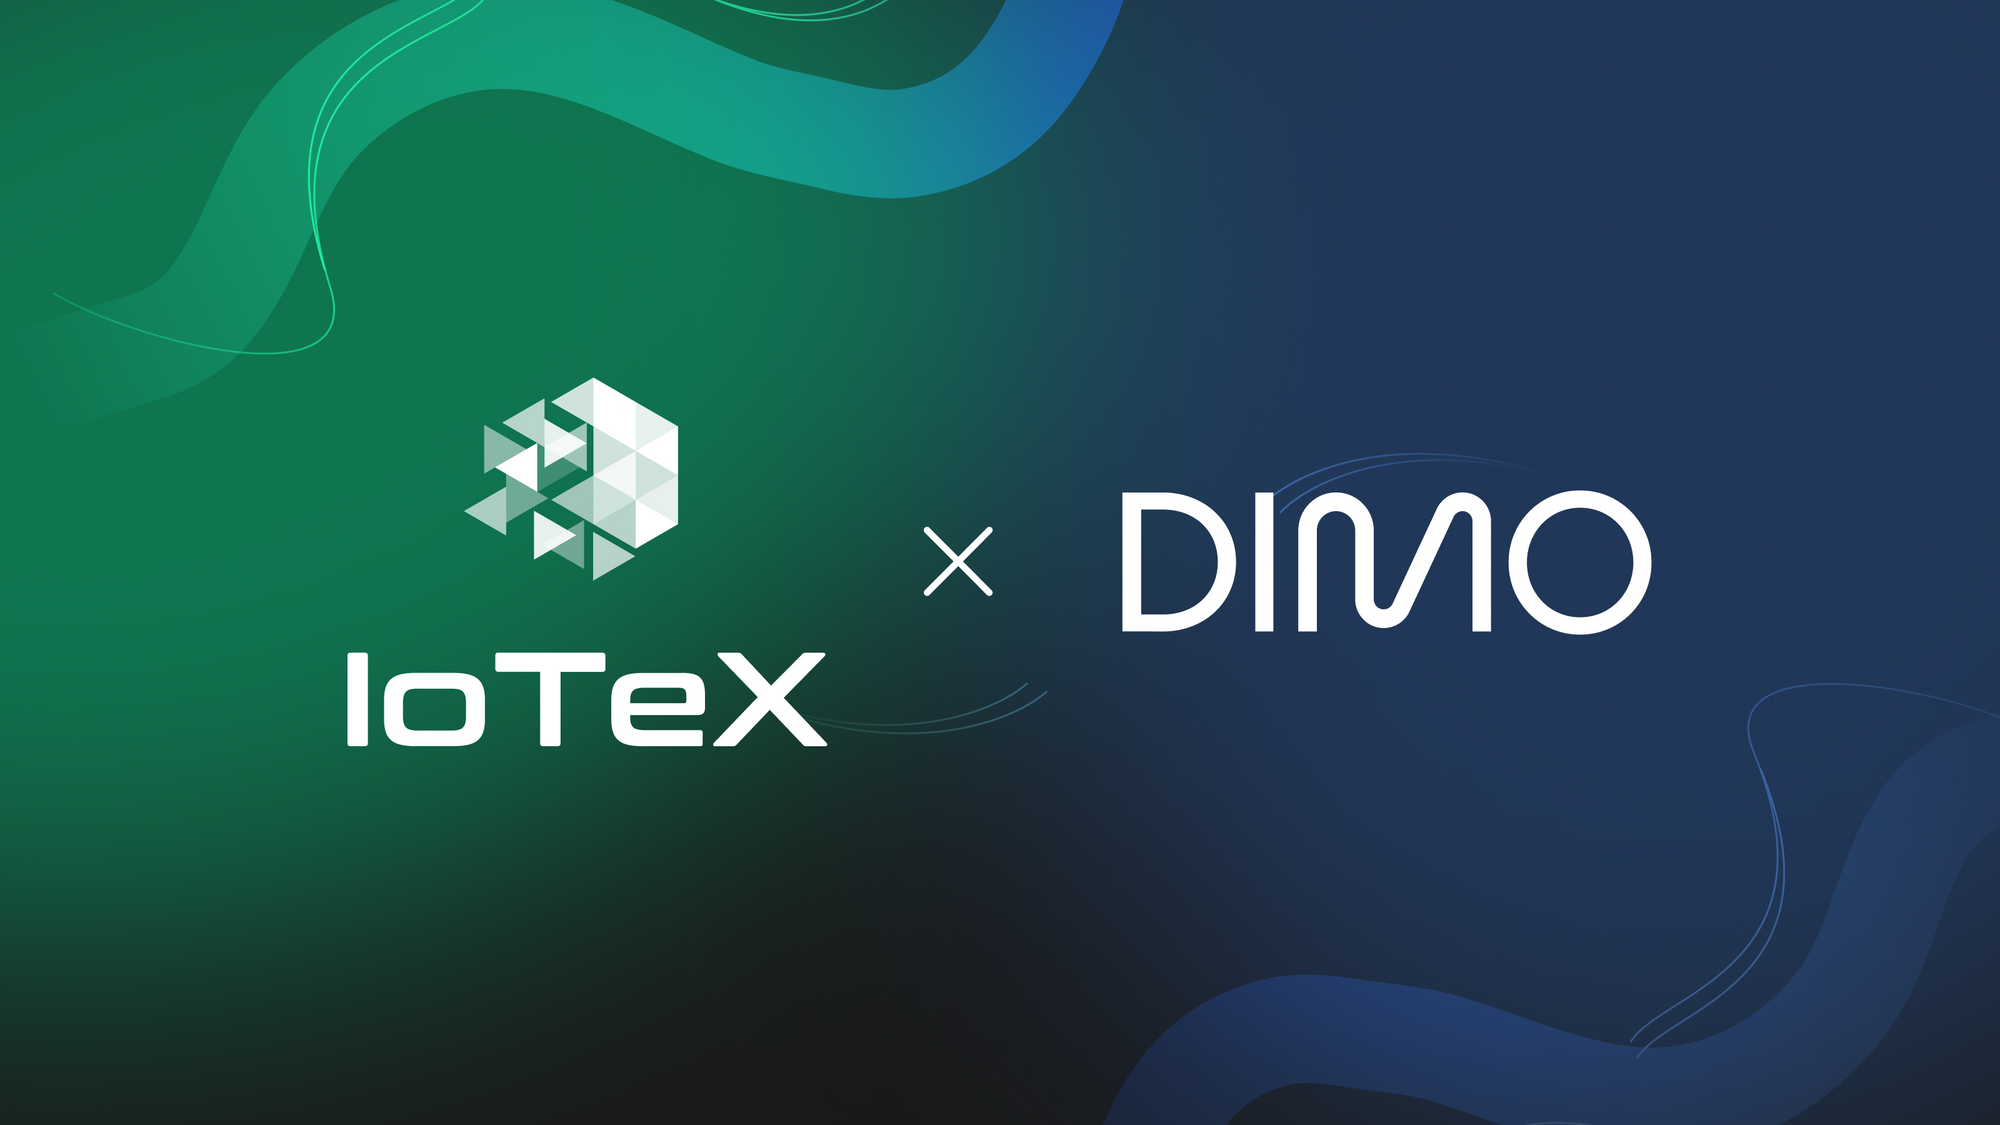 IoTeX and DIMO Partner to Drive the Future of Mobility in Web3